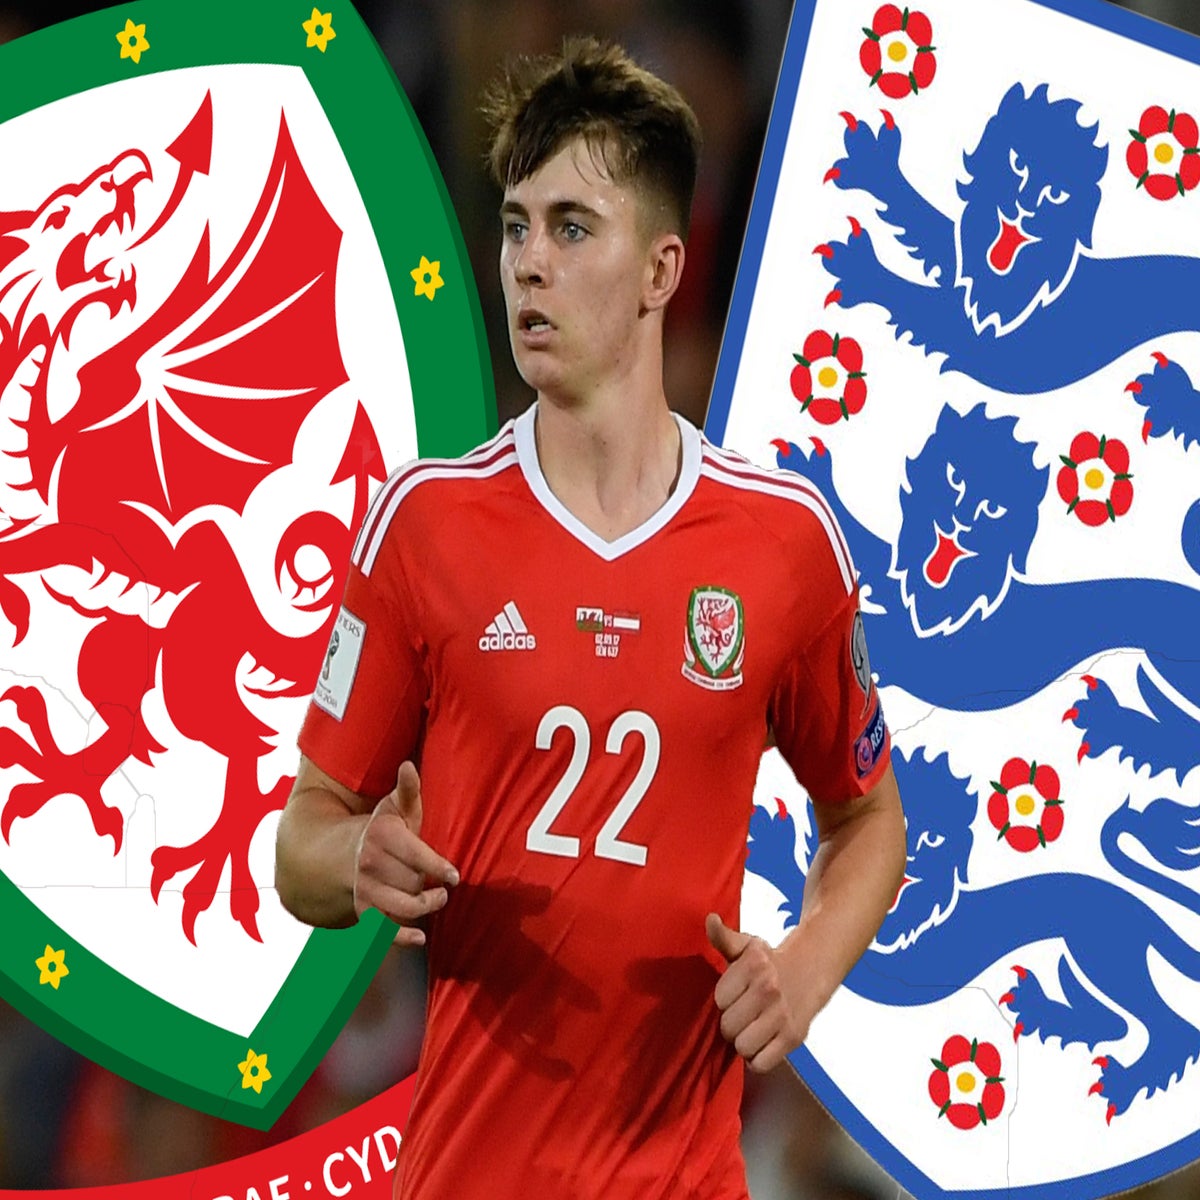 Cardiff City youngster receives first Wales U21 call-up after